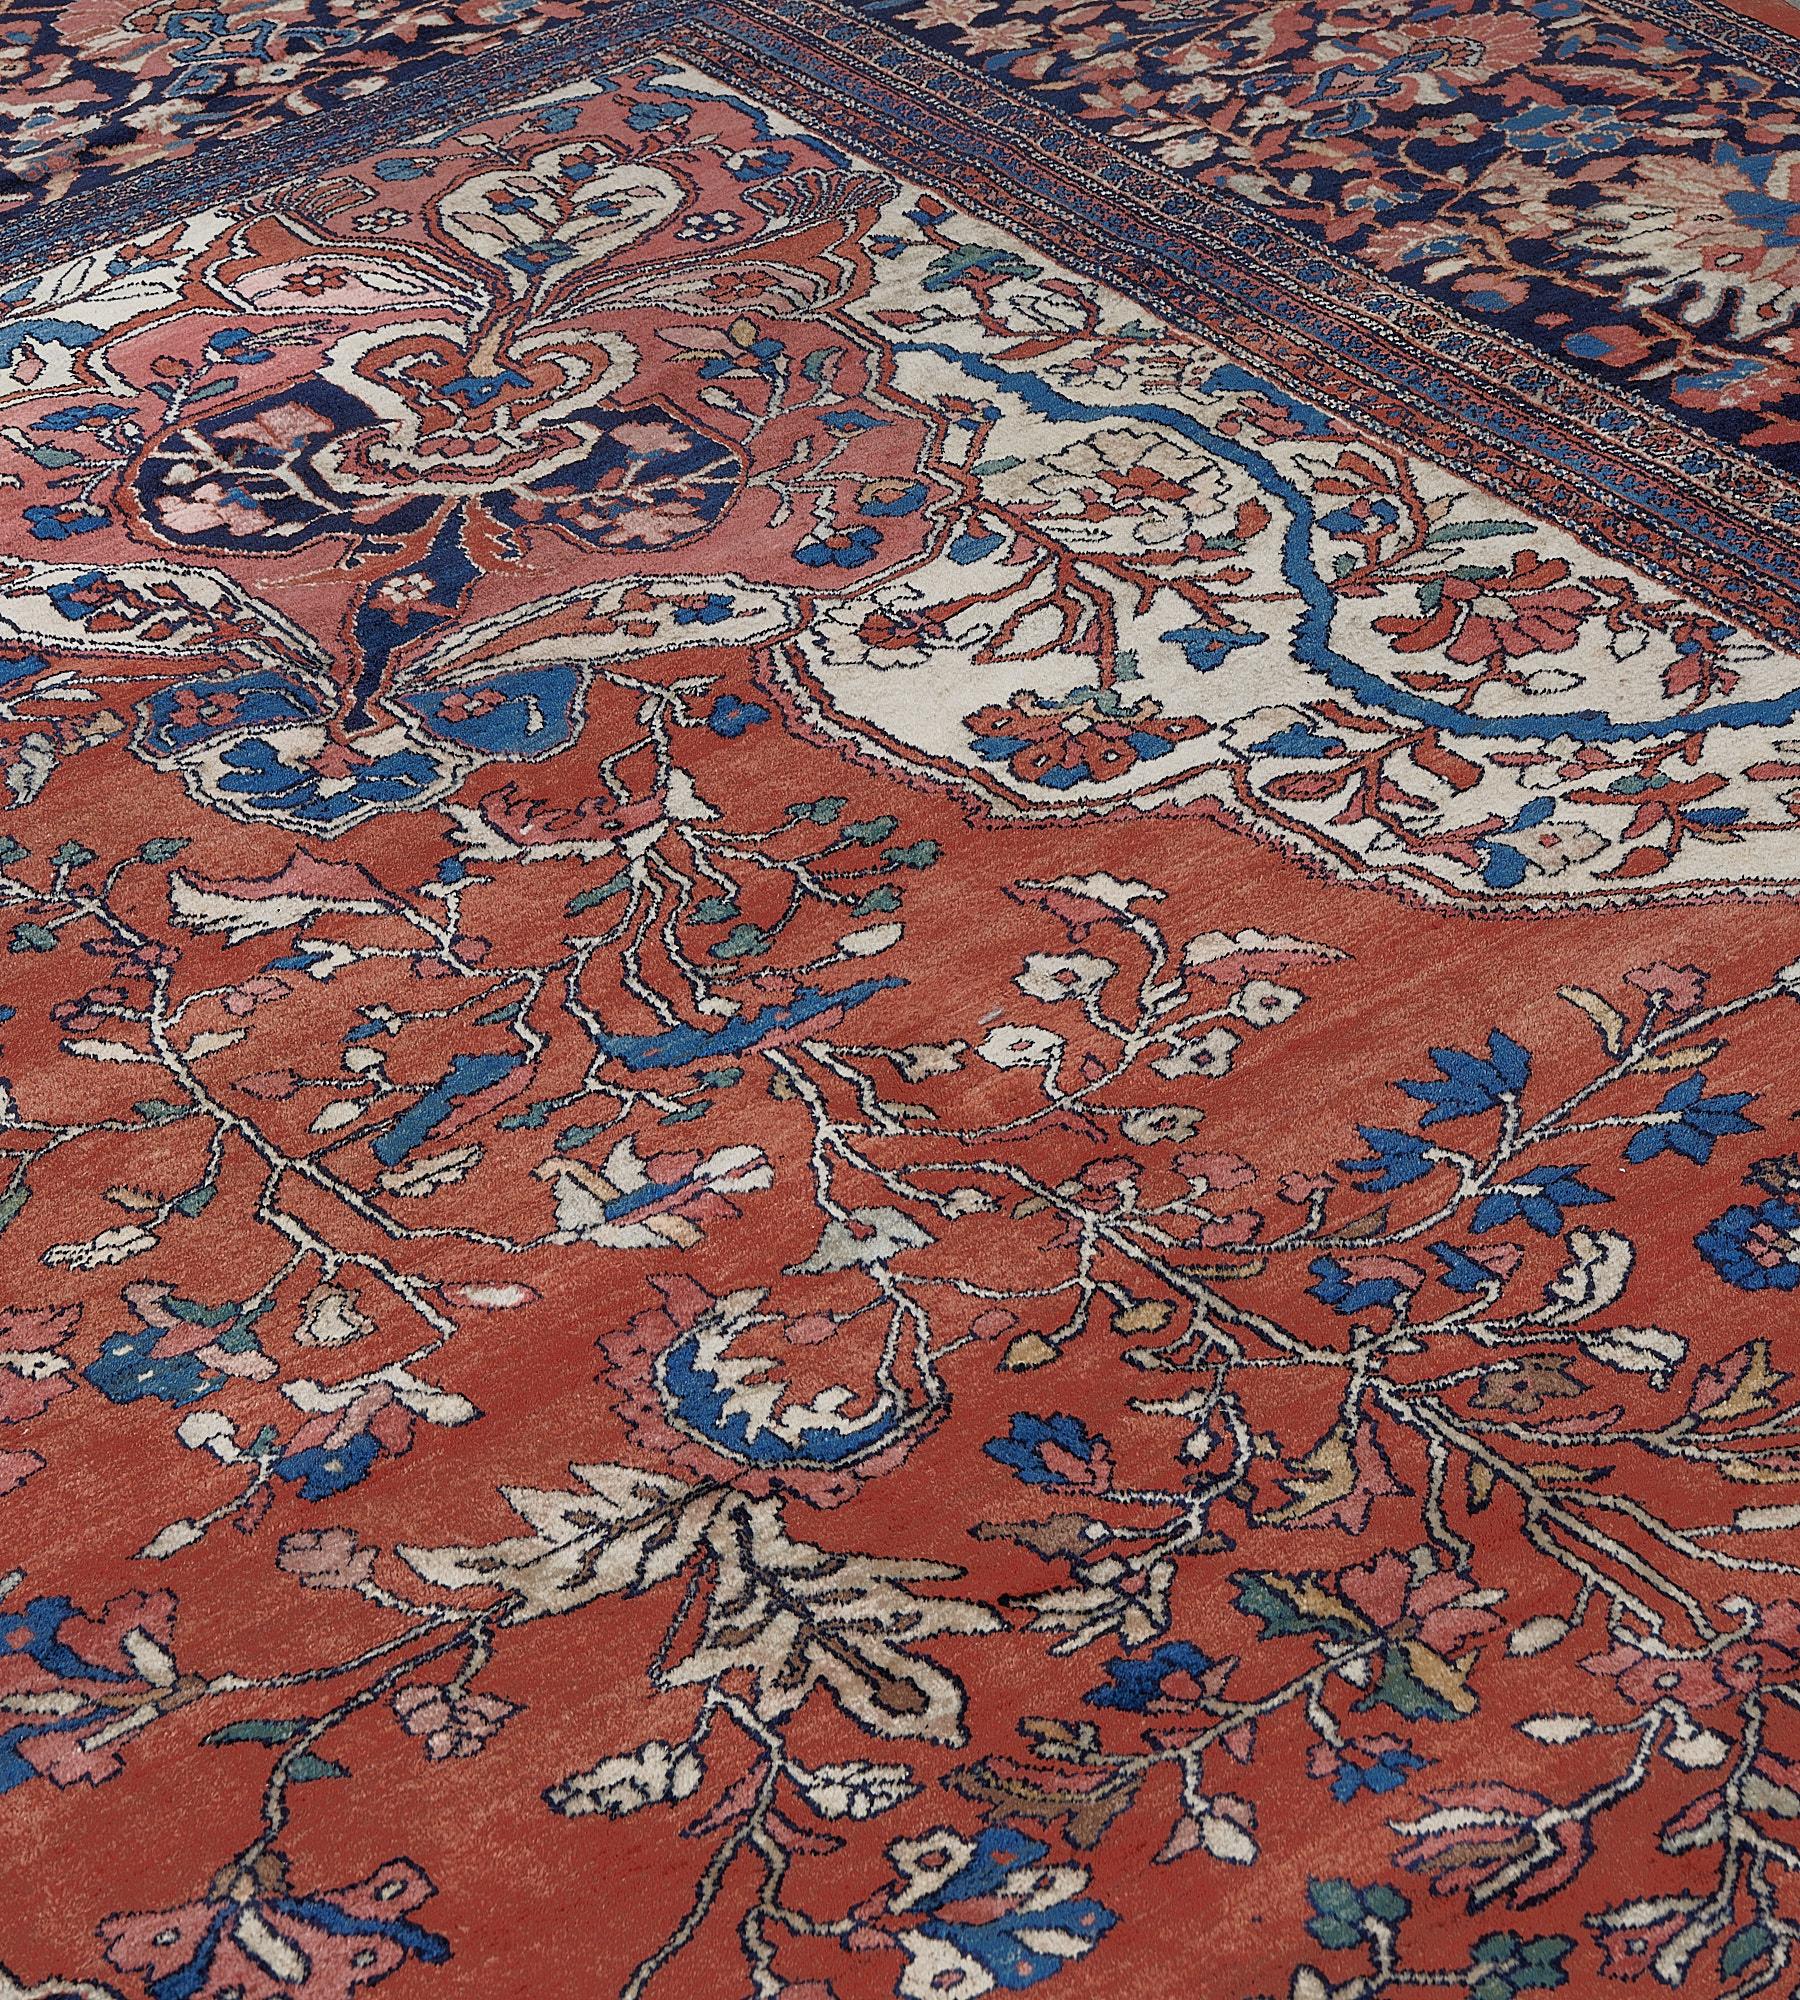 Antique Handwoven Persian Faraghan Rug in Perfect Condition For Sale 5